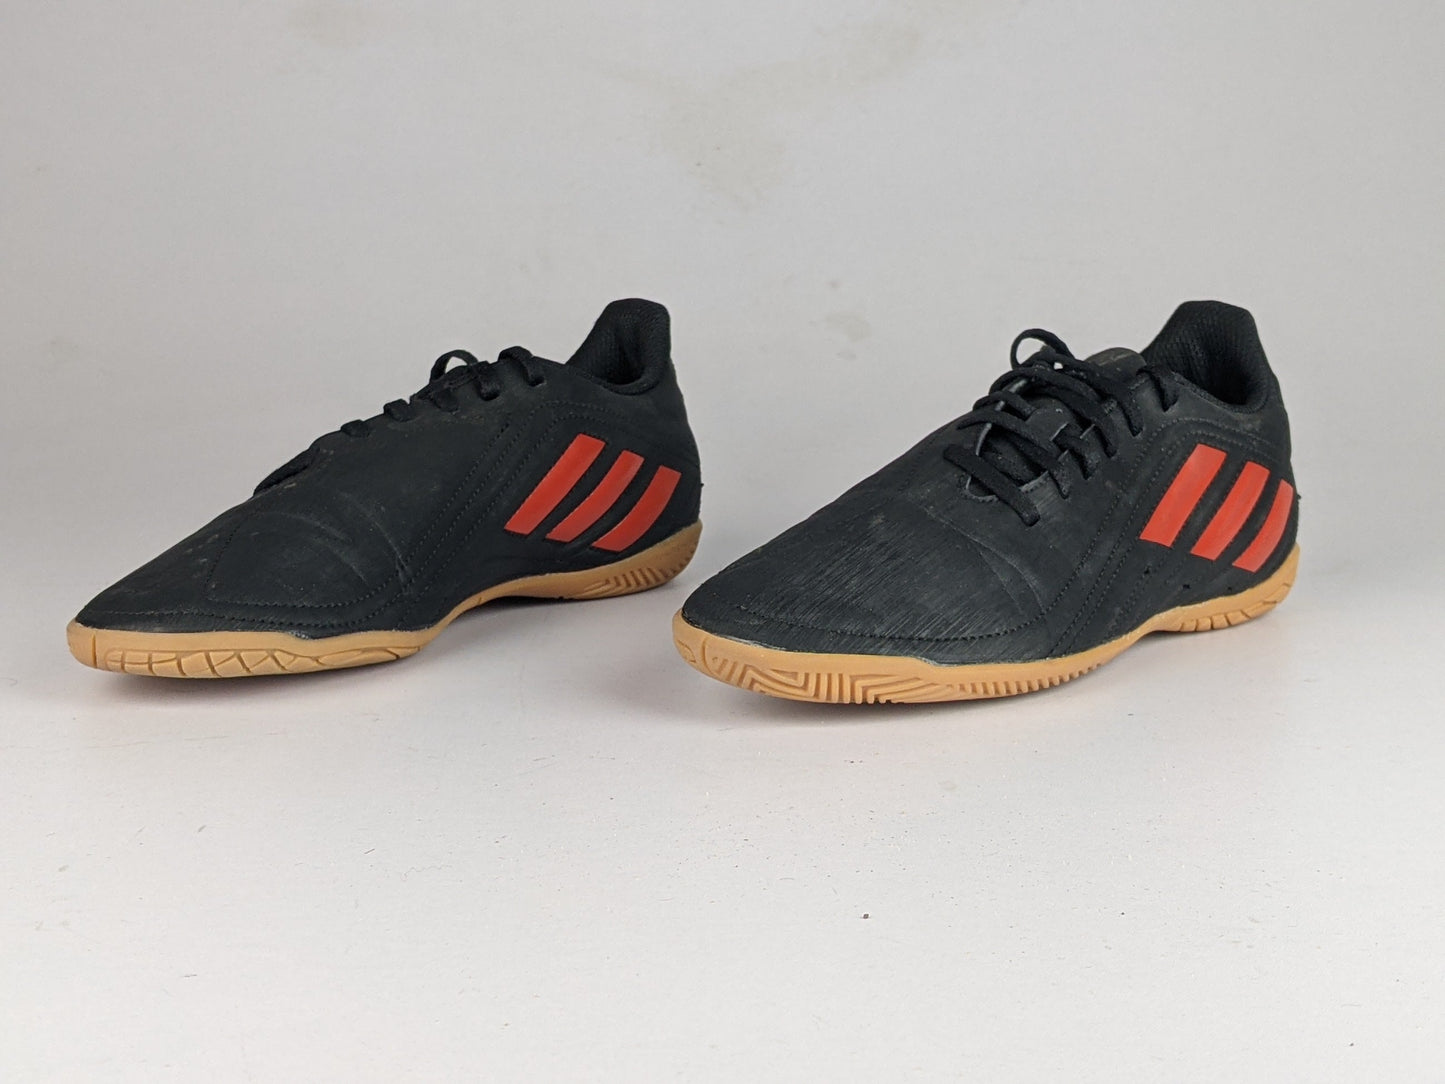 adidas Deportivo IN 'Black/Red'